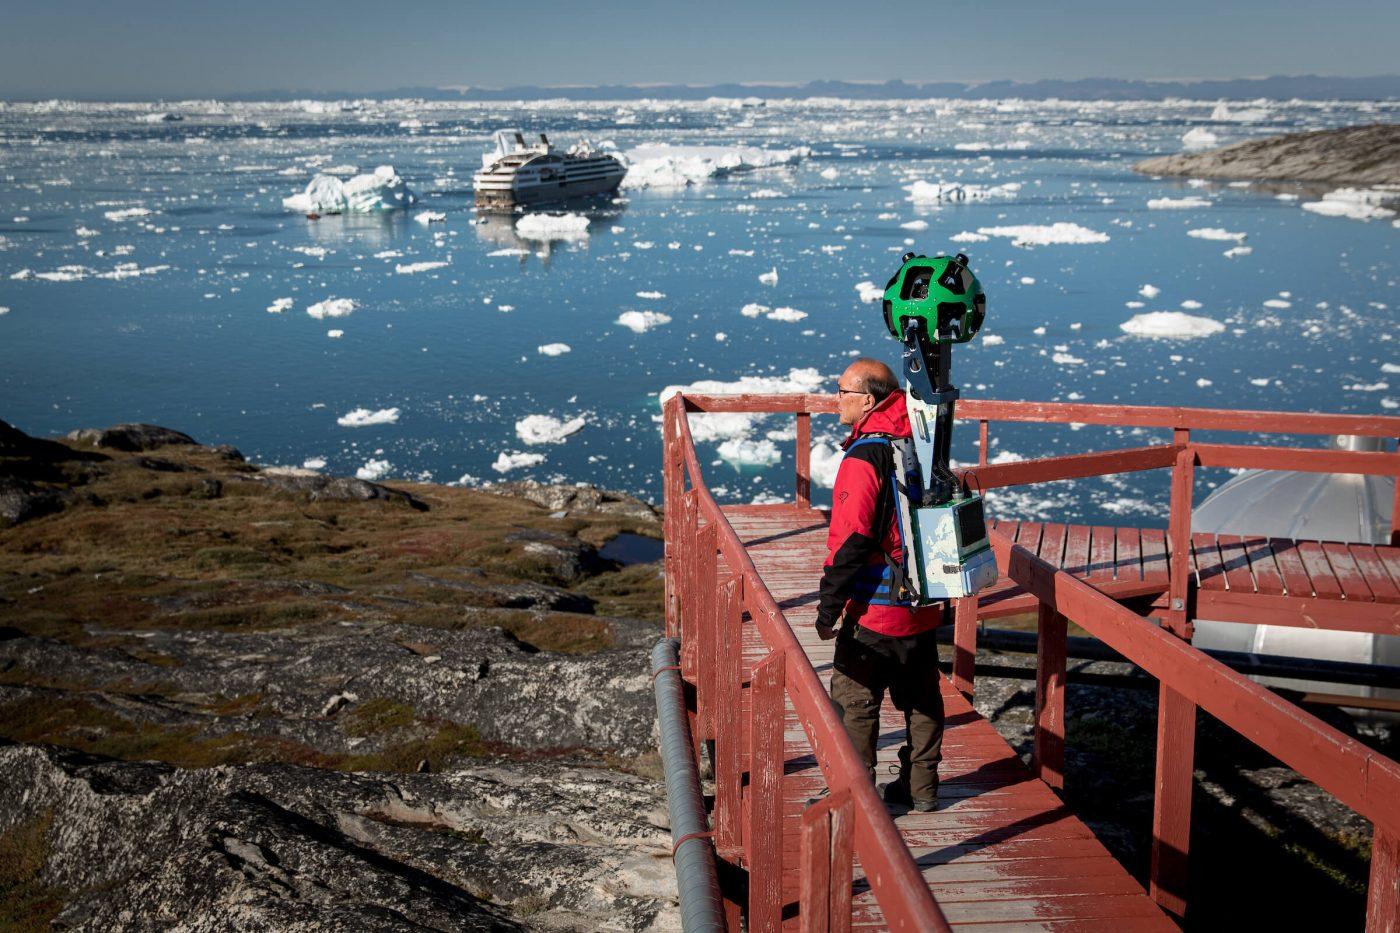 The Google Street View trekker at work near Hotel Arctic in Ilulissat in Greenland. By Mads Pihl